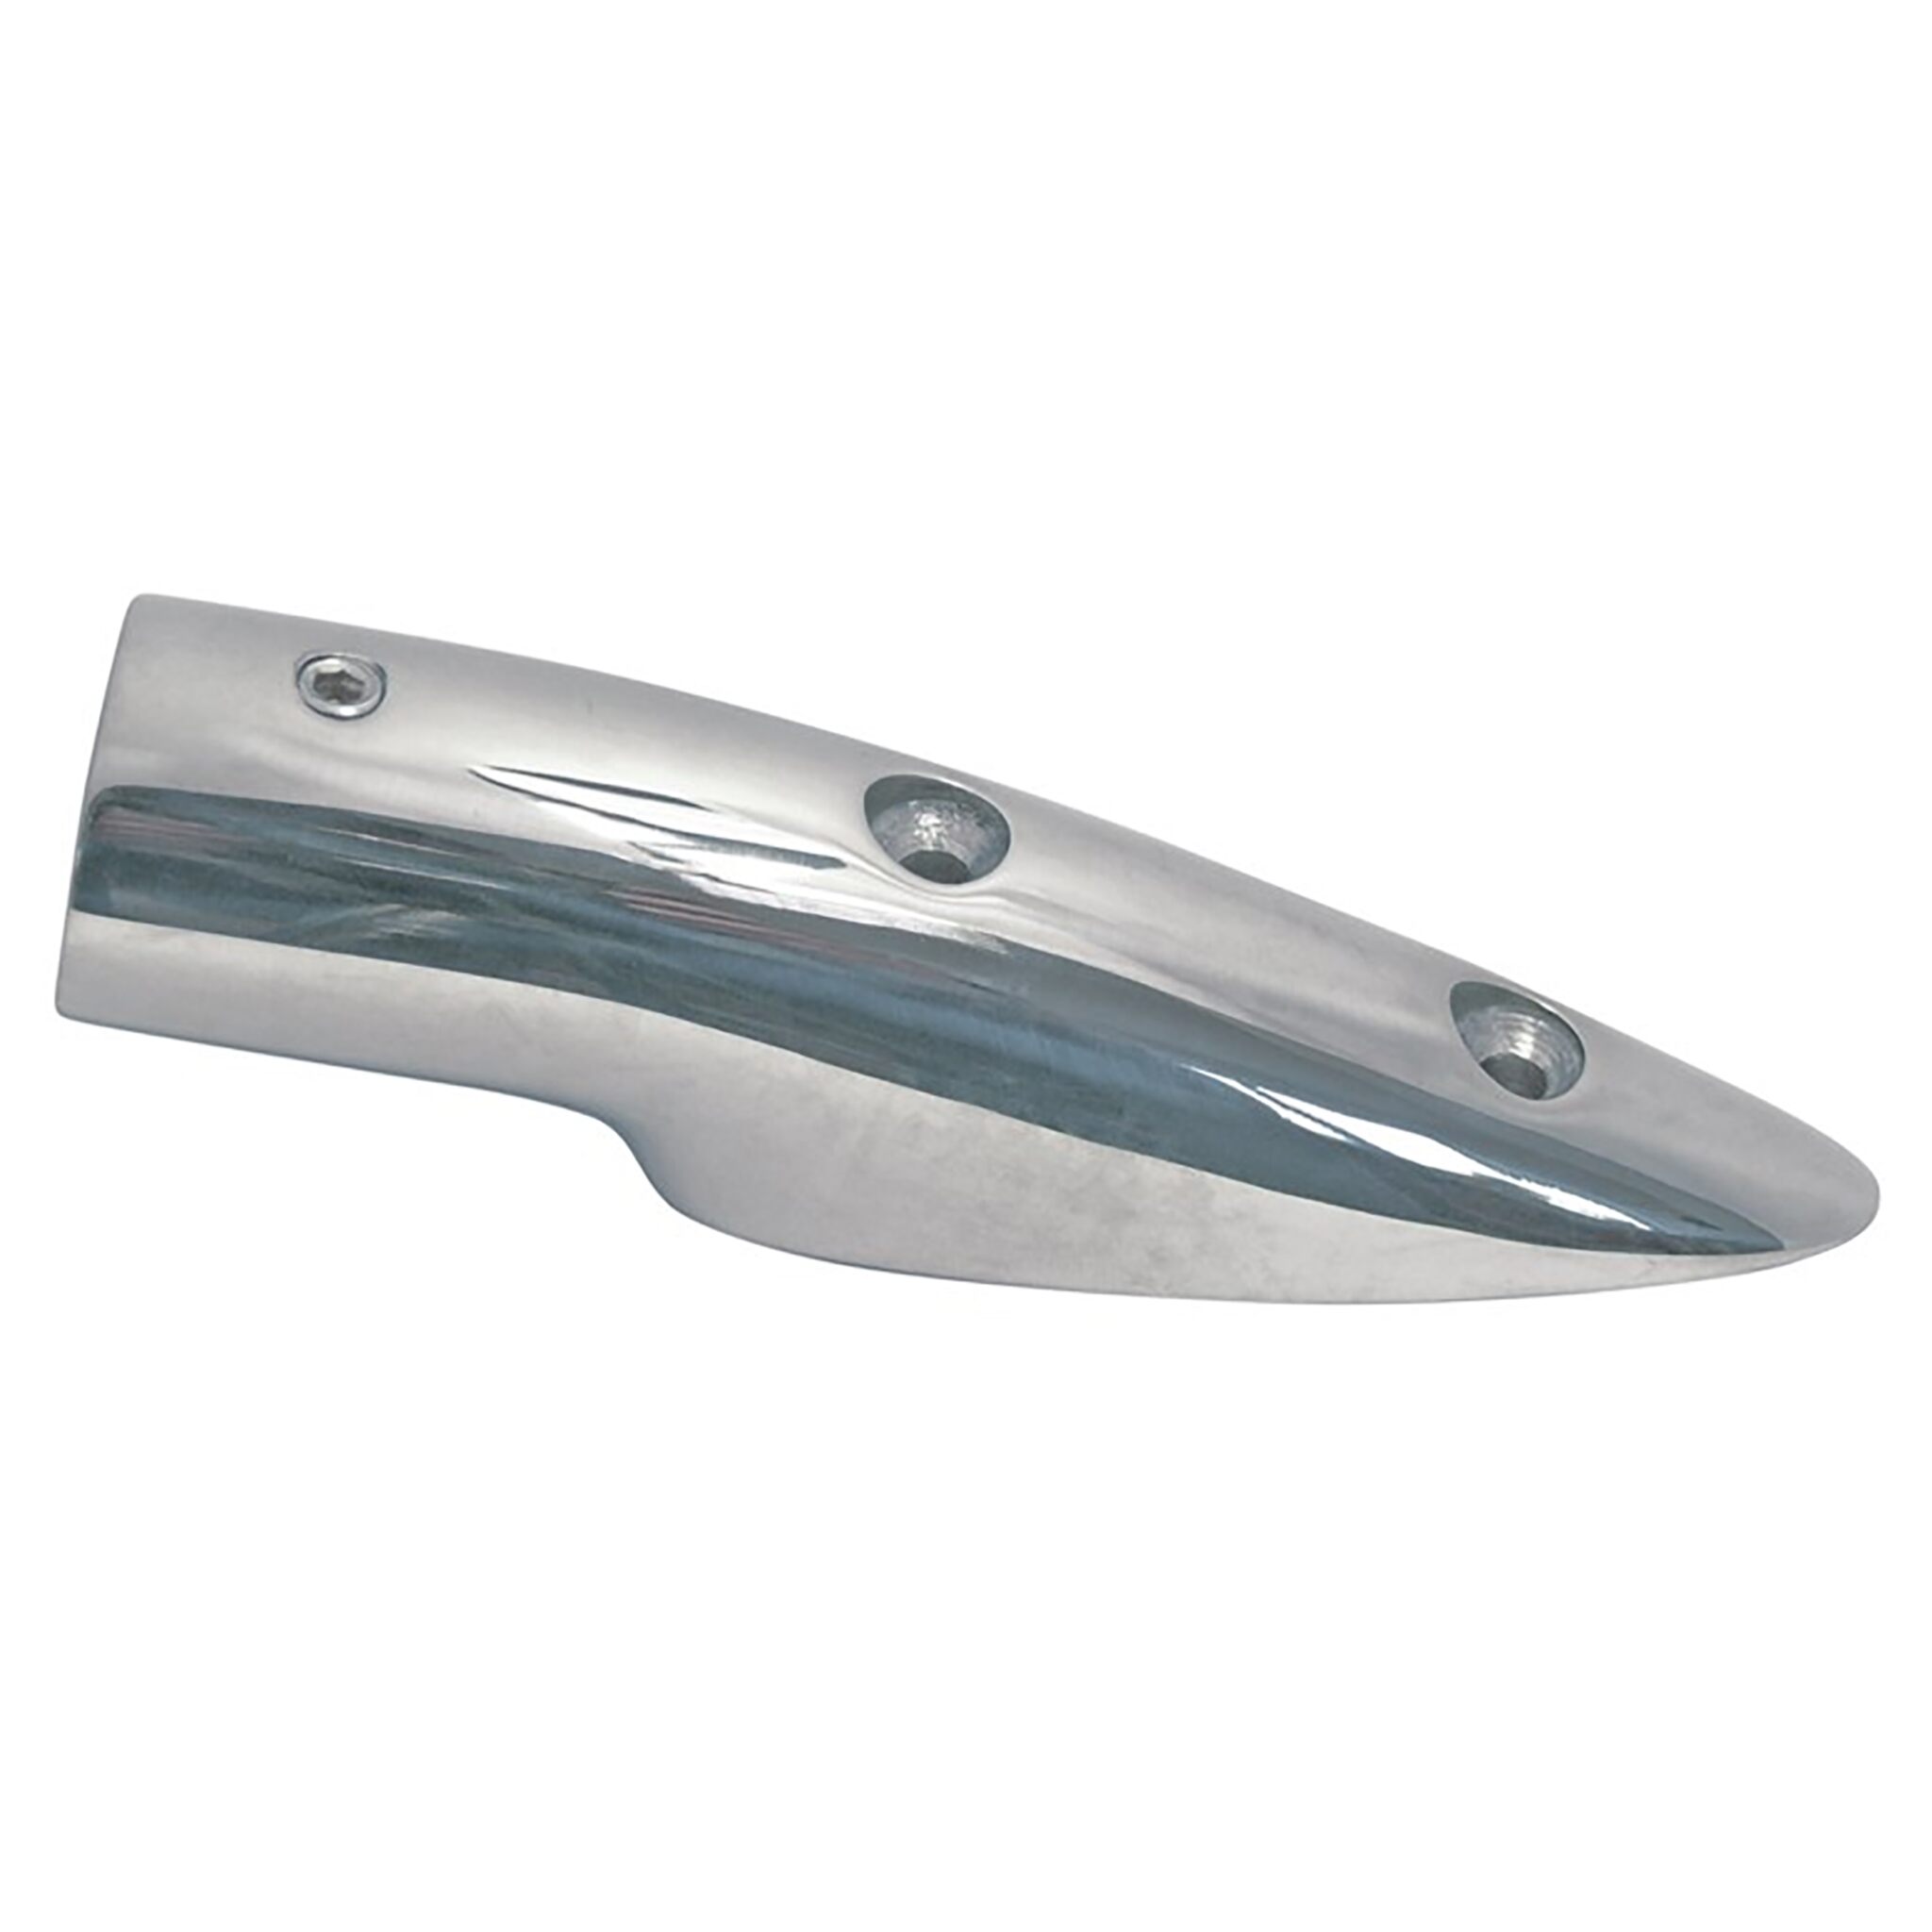 Handrail end piece, stainless steel